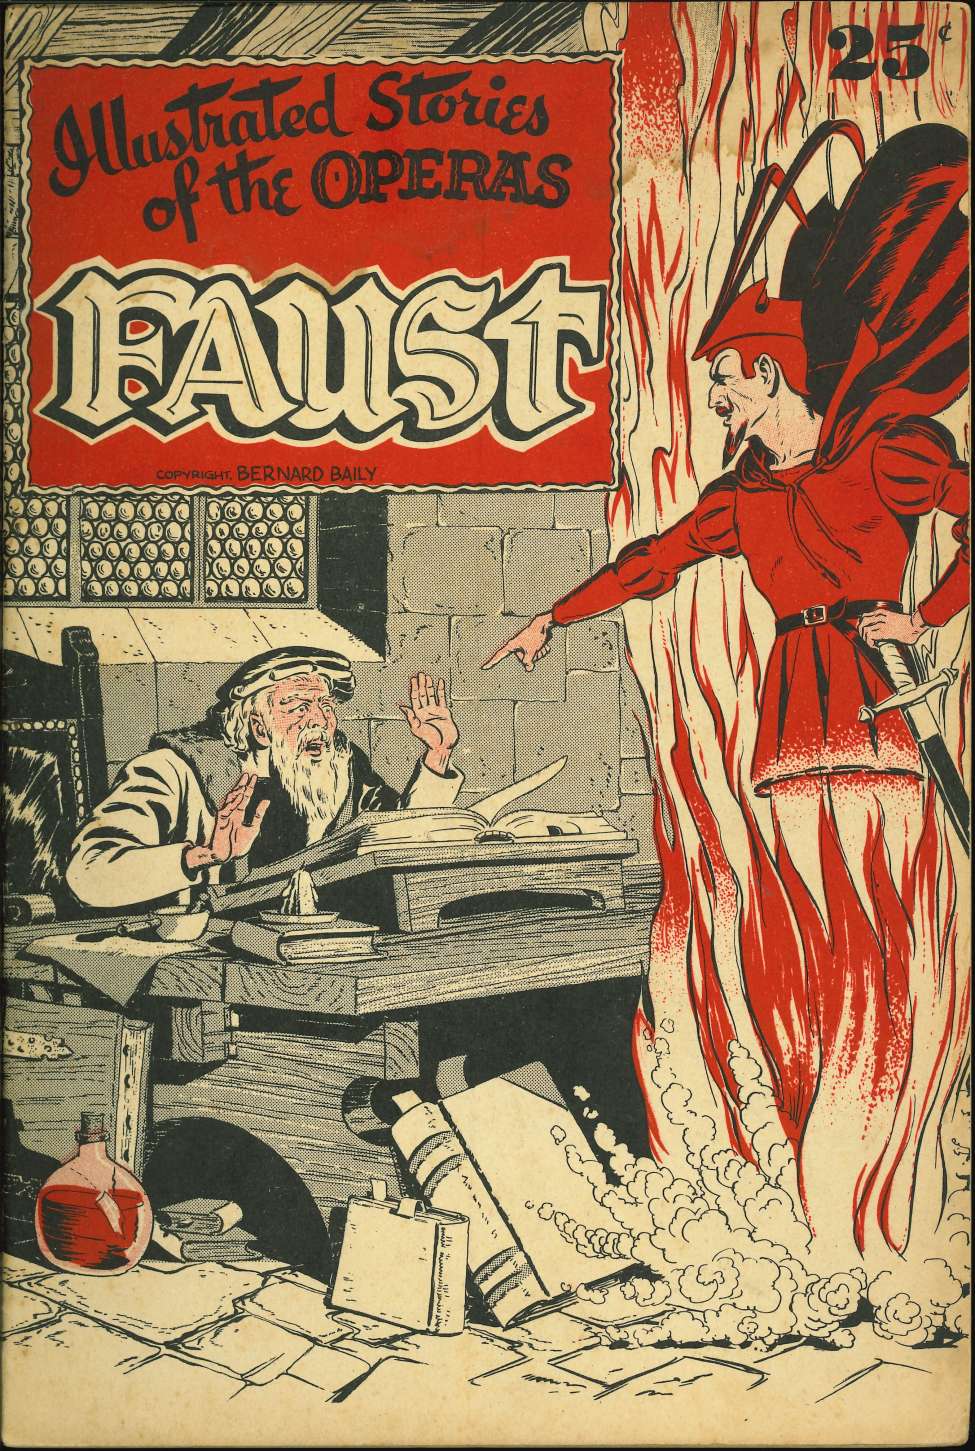 Comic Book Cover For Illustrated Stories of the Operas: Faust